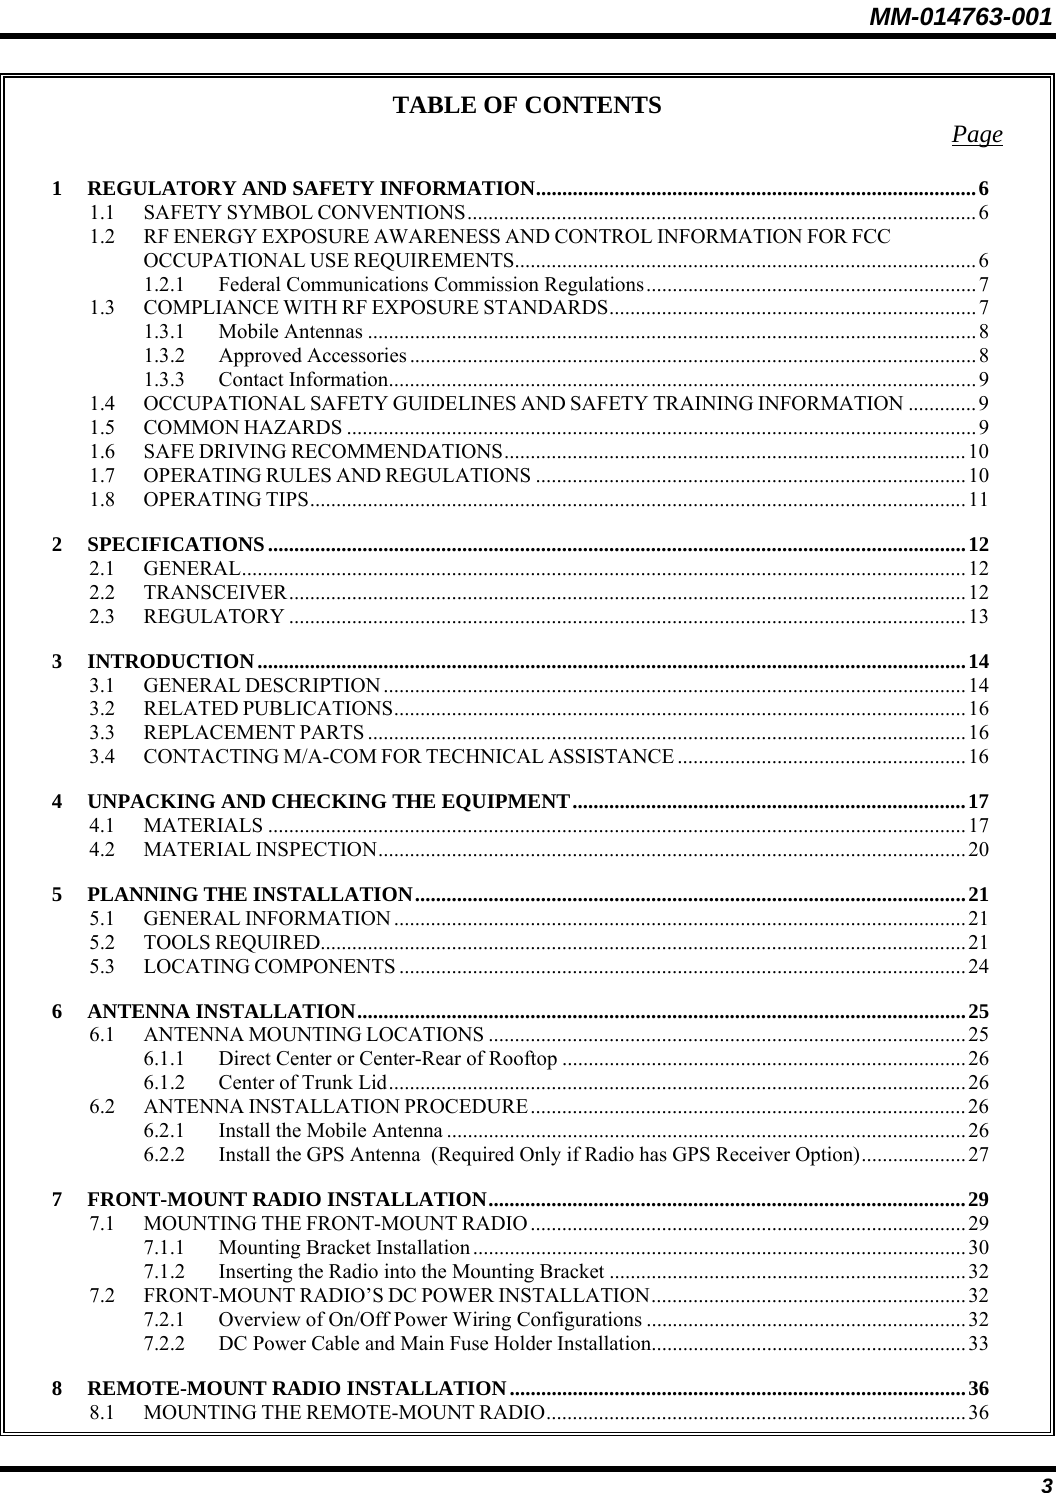 MM-014763-001 3 TABLE OF CONTENTS  Page 1 REGULATORY AND SAFETY INFORMATION....................................................................................6 1.1 SAFETY SYMBOL CONVENTIONS.................................................................................................6 1.2 RF ENERGY EXPOSURE AWARENESS AND CONTROL INFORMATION FOR FCC OCCUPATIONAL USE REQUIREMENTS........................................................................................ 6 1.2.1 Federal Communications Commission Regulations...............................................................7 1.3 COMPLIANCE WITH RF EXPOSURE STANDARDS...................................................................... 7 1.3.1 Mobile Antennas ....................................................................................................................8 1.3.2 Approved Accessories............................................................................................................8 1.3.3 Contact Information................................................................................................................9 1.4 OCCUPATIONAL SAFETY GUIDELINES AND SAFETY TRAINING INFORMATION .............9 1.5 COMMON HAZARDS ........................................................................................................................9 1.6 SAFE DRIVING RECOMMENDATIONS........................................................................................10 1.7 OPERATING RULES AND REGULATIONS ..................................................................................10 1.8 OPERATING TIPS............................................................................................................................. 11 2 SPECIFICATIONS.....................................................................................................................................12 2.1 GENERAL..........................................................................................................................................12 2.2 TRANSCEIVER.................................................................................................................................12 2.3 REGULATORY .................................................................................................................................13 3 INTRODUCTION.......................................................................................................................................14 3.1 GENERAL DESCRIPTION ...............................................................................................................14 3.2 RELATED PUBLICATIONS.............................................................................................................16 3.3 REPLACEMENT PARTS ..................................................................................................................16 3.4 CONTACTING M/A-COM FOR TECHNICAL ASSISTANCE .......................................................16 4 UNPACKING AND CHECKING THE EQUIPMENT...........................................................................17 4.1 MATERIALS .....................................................................................................................................17 4.2 MATERIAL INSPECTION................................................................................................................ 20 5 PLANNING THE INSTALLATION.........................................................................................................21 5.1 GENERAL INFORMATION .............................................................................................................21 5.2 TOOLS REQUIRED...........................................................................................................................21 5.3 LOCATING COMPONENTS ............................................................................................................24 6 ANTENNA INSTALLATION....................................................................................................................25 6.1 ANTENNA MOUNTING LOCATIONS ...........................................................................................25 6.1.1 Direct Center or Center-Rear of Rooftop .............................................................................26 6.1.2 Center of Trunk Lid..............................................................................................................26 6.2 ANTENNA INSTALLATION PROCEDURE...................................................................................26 6.2.1 Install the Mobile Antenna ...................................................................................................26 6.2.2 Install the GPS Antenna  (Required Only if Radio has GPS Receiver Option).................... 27 7 FRONT-MOUNT RADIO INSTALLATION...........................................................................................29 7.1 MOUNTING THE FRONT-MOUNT RADIO ................................................................................... 29 7.1.1 Mounting Bracket Installation ..............................................................................................30 7.1.2 Inserting the Radio into the Mounting Bracket ....................................................................32 7.2 FRONT-MOUNT RADIO’S DC POWER INSTALLATION............................................................32 7.2.1 Overview of On/Off Power Wiring Configurations ............................................................. 32 7.2.2 DC Power Cable and Main Fuse Holder Installation............................................................33 8 REMOTE-MOUNT RADIO INSTALLATION.......................................................................................36 8.1 MOUNTING THE REMOTE-MOUNT RADIO................................................................................36 